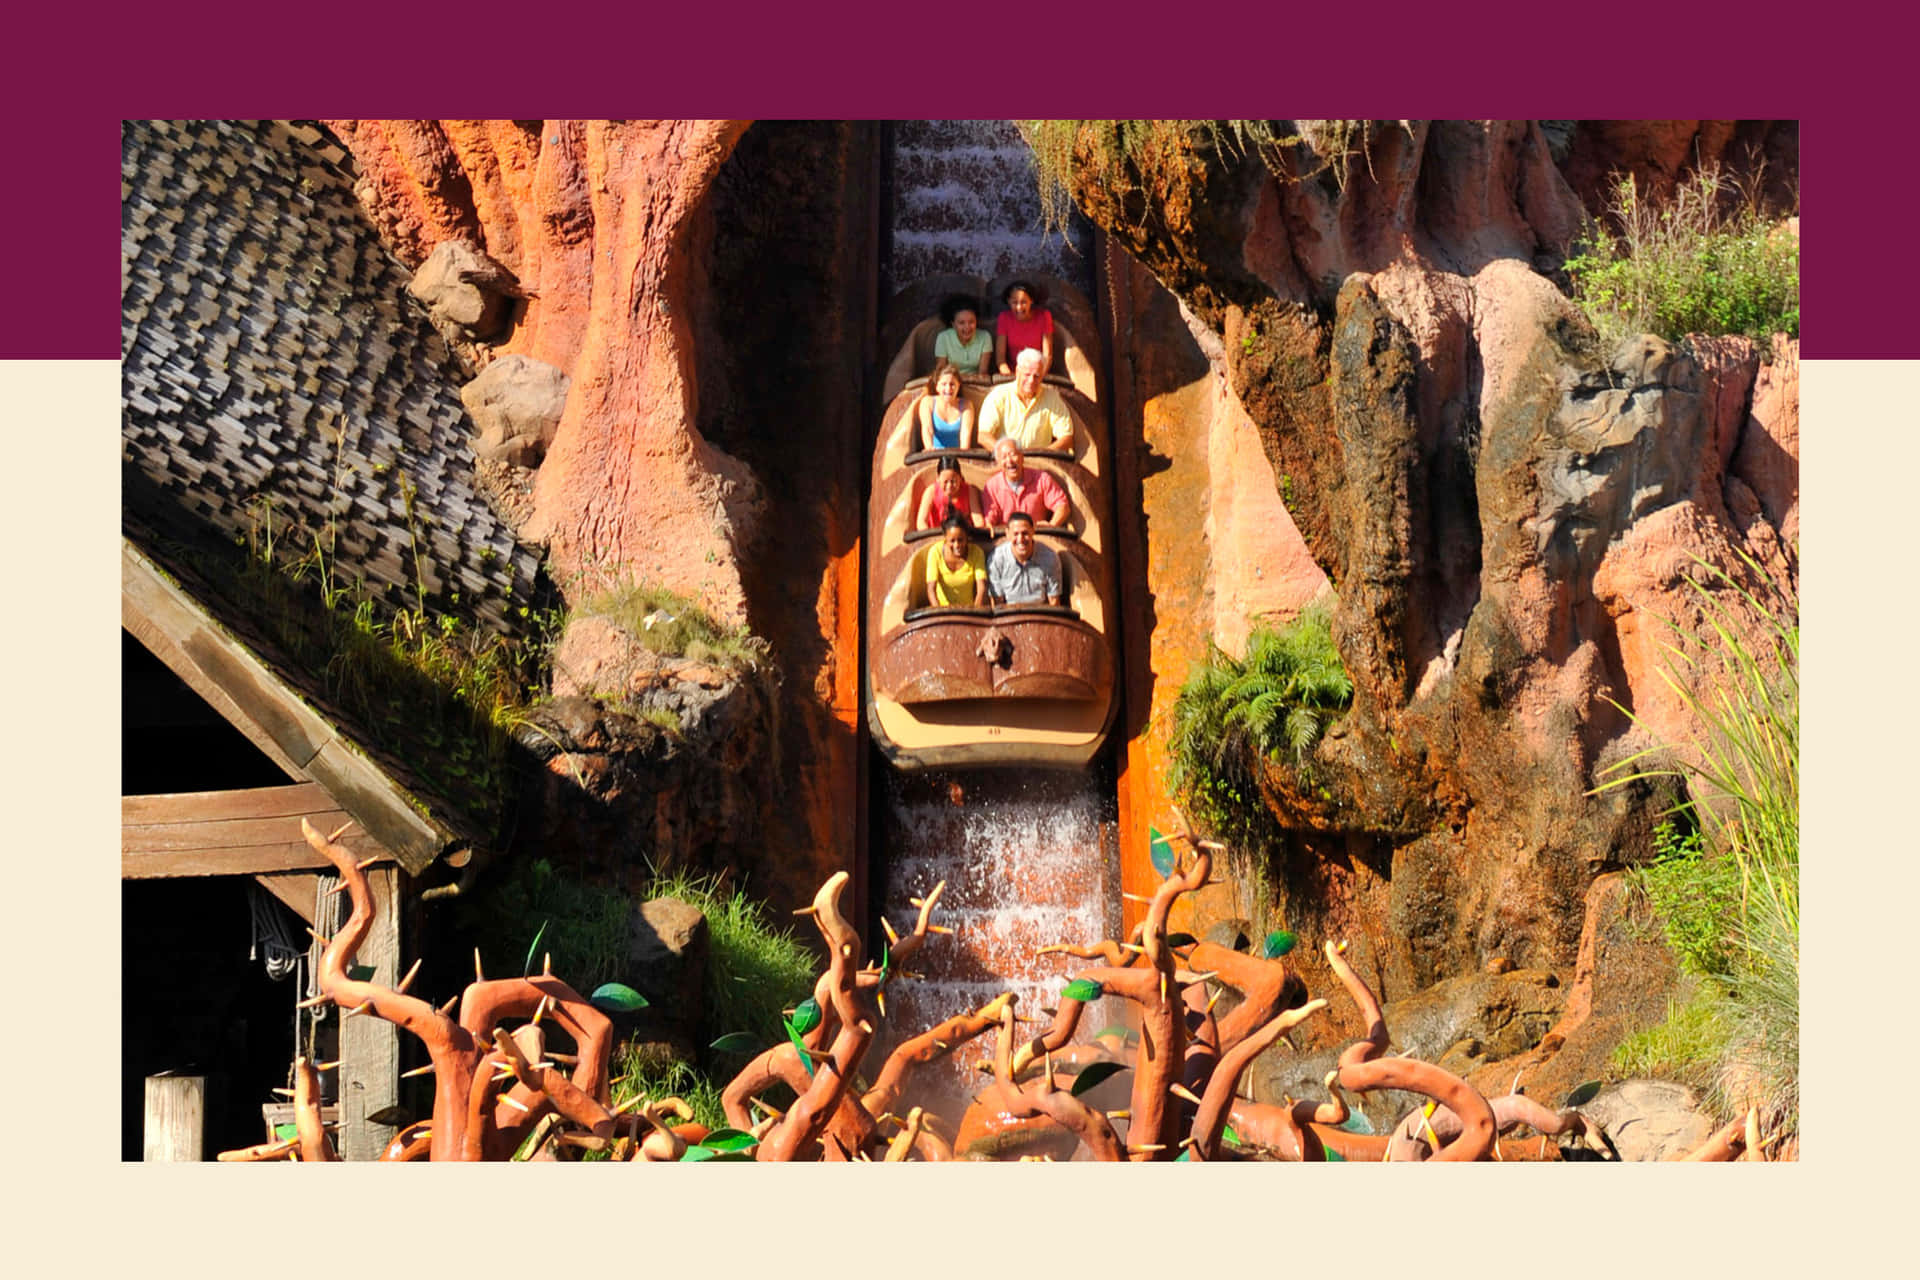 Navigate a Long and Windy Adventure at Splash Mountain